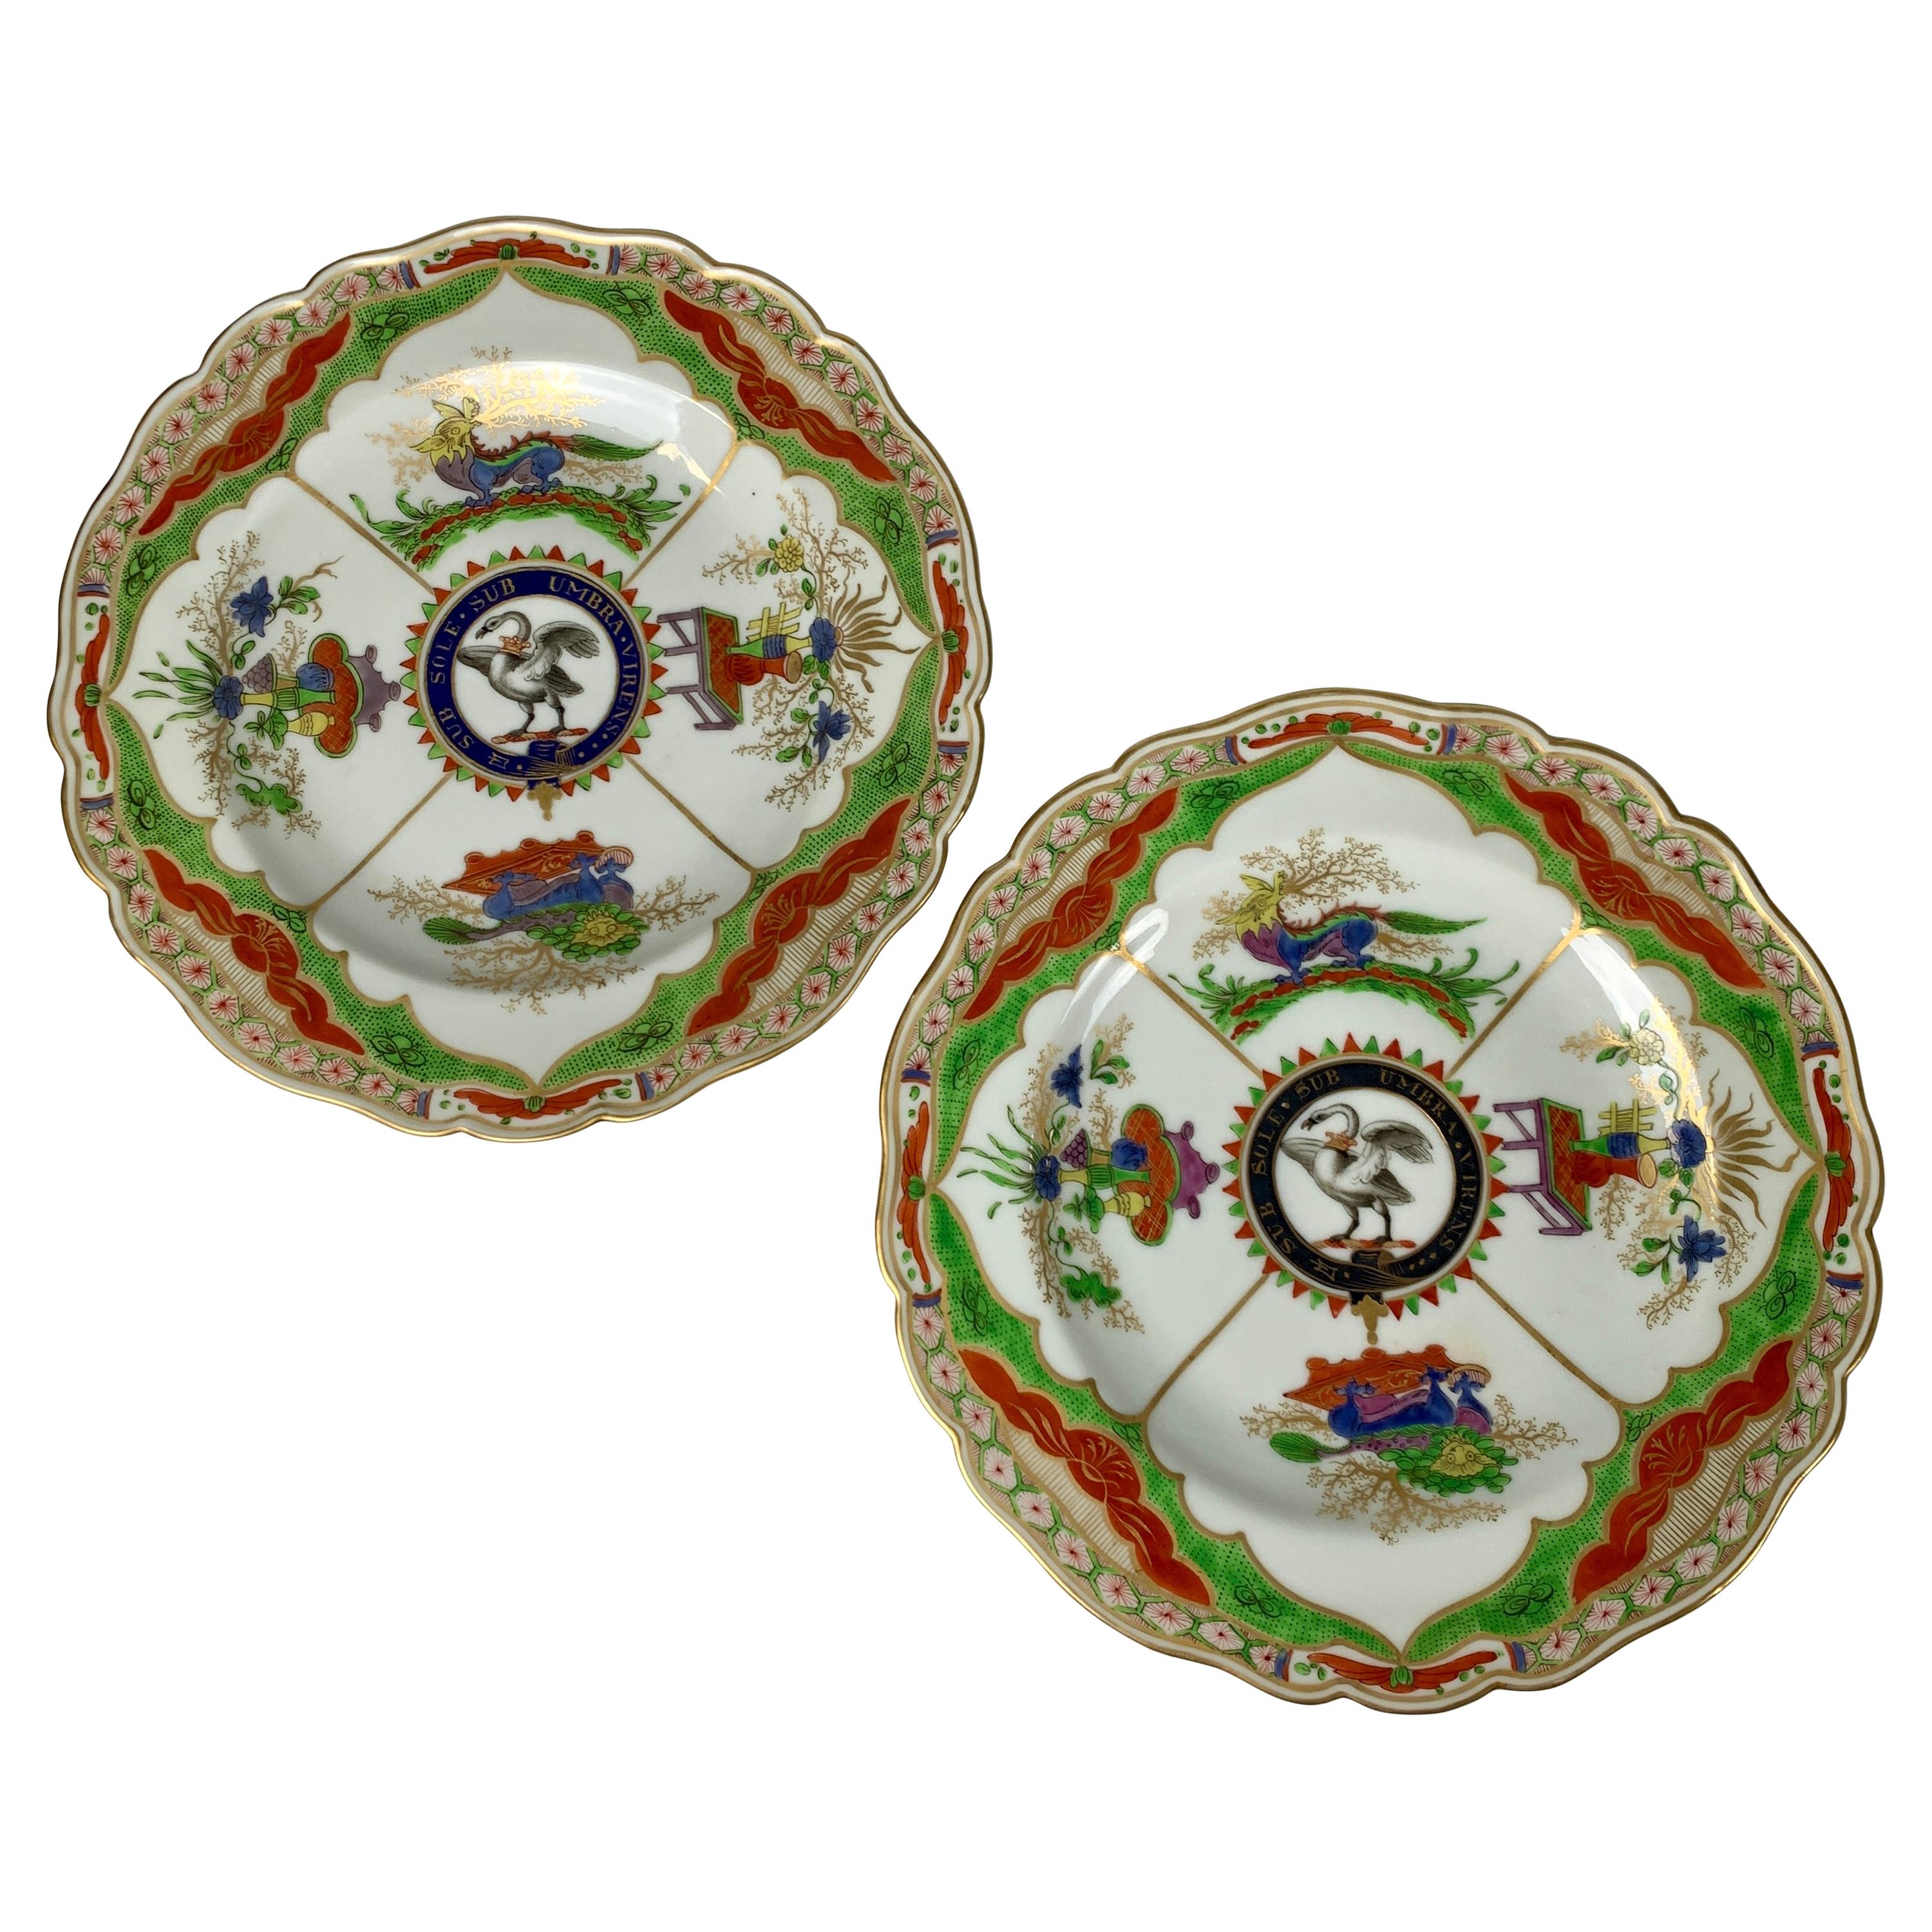 Pair Dragons in Compartments Plates with Scottish Armorial of the Clan Irvine